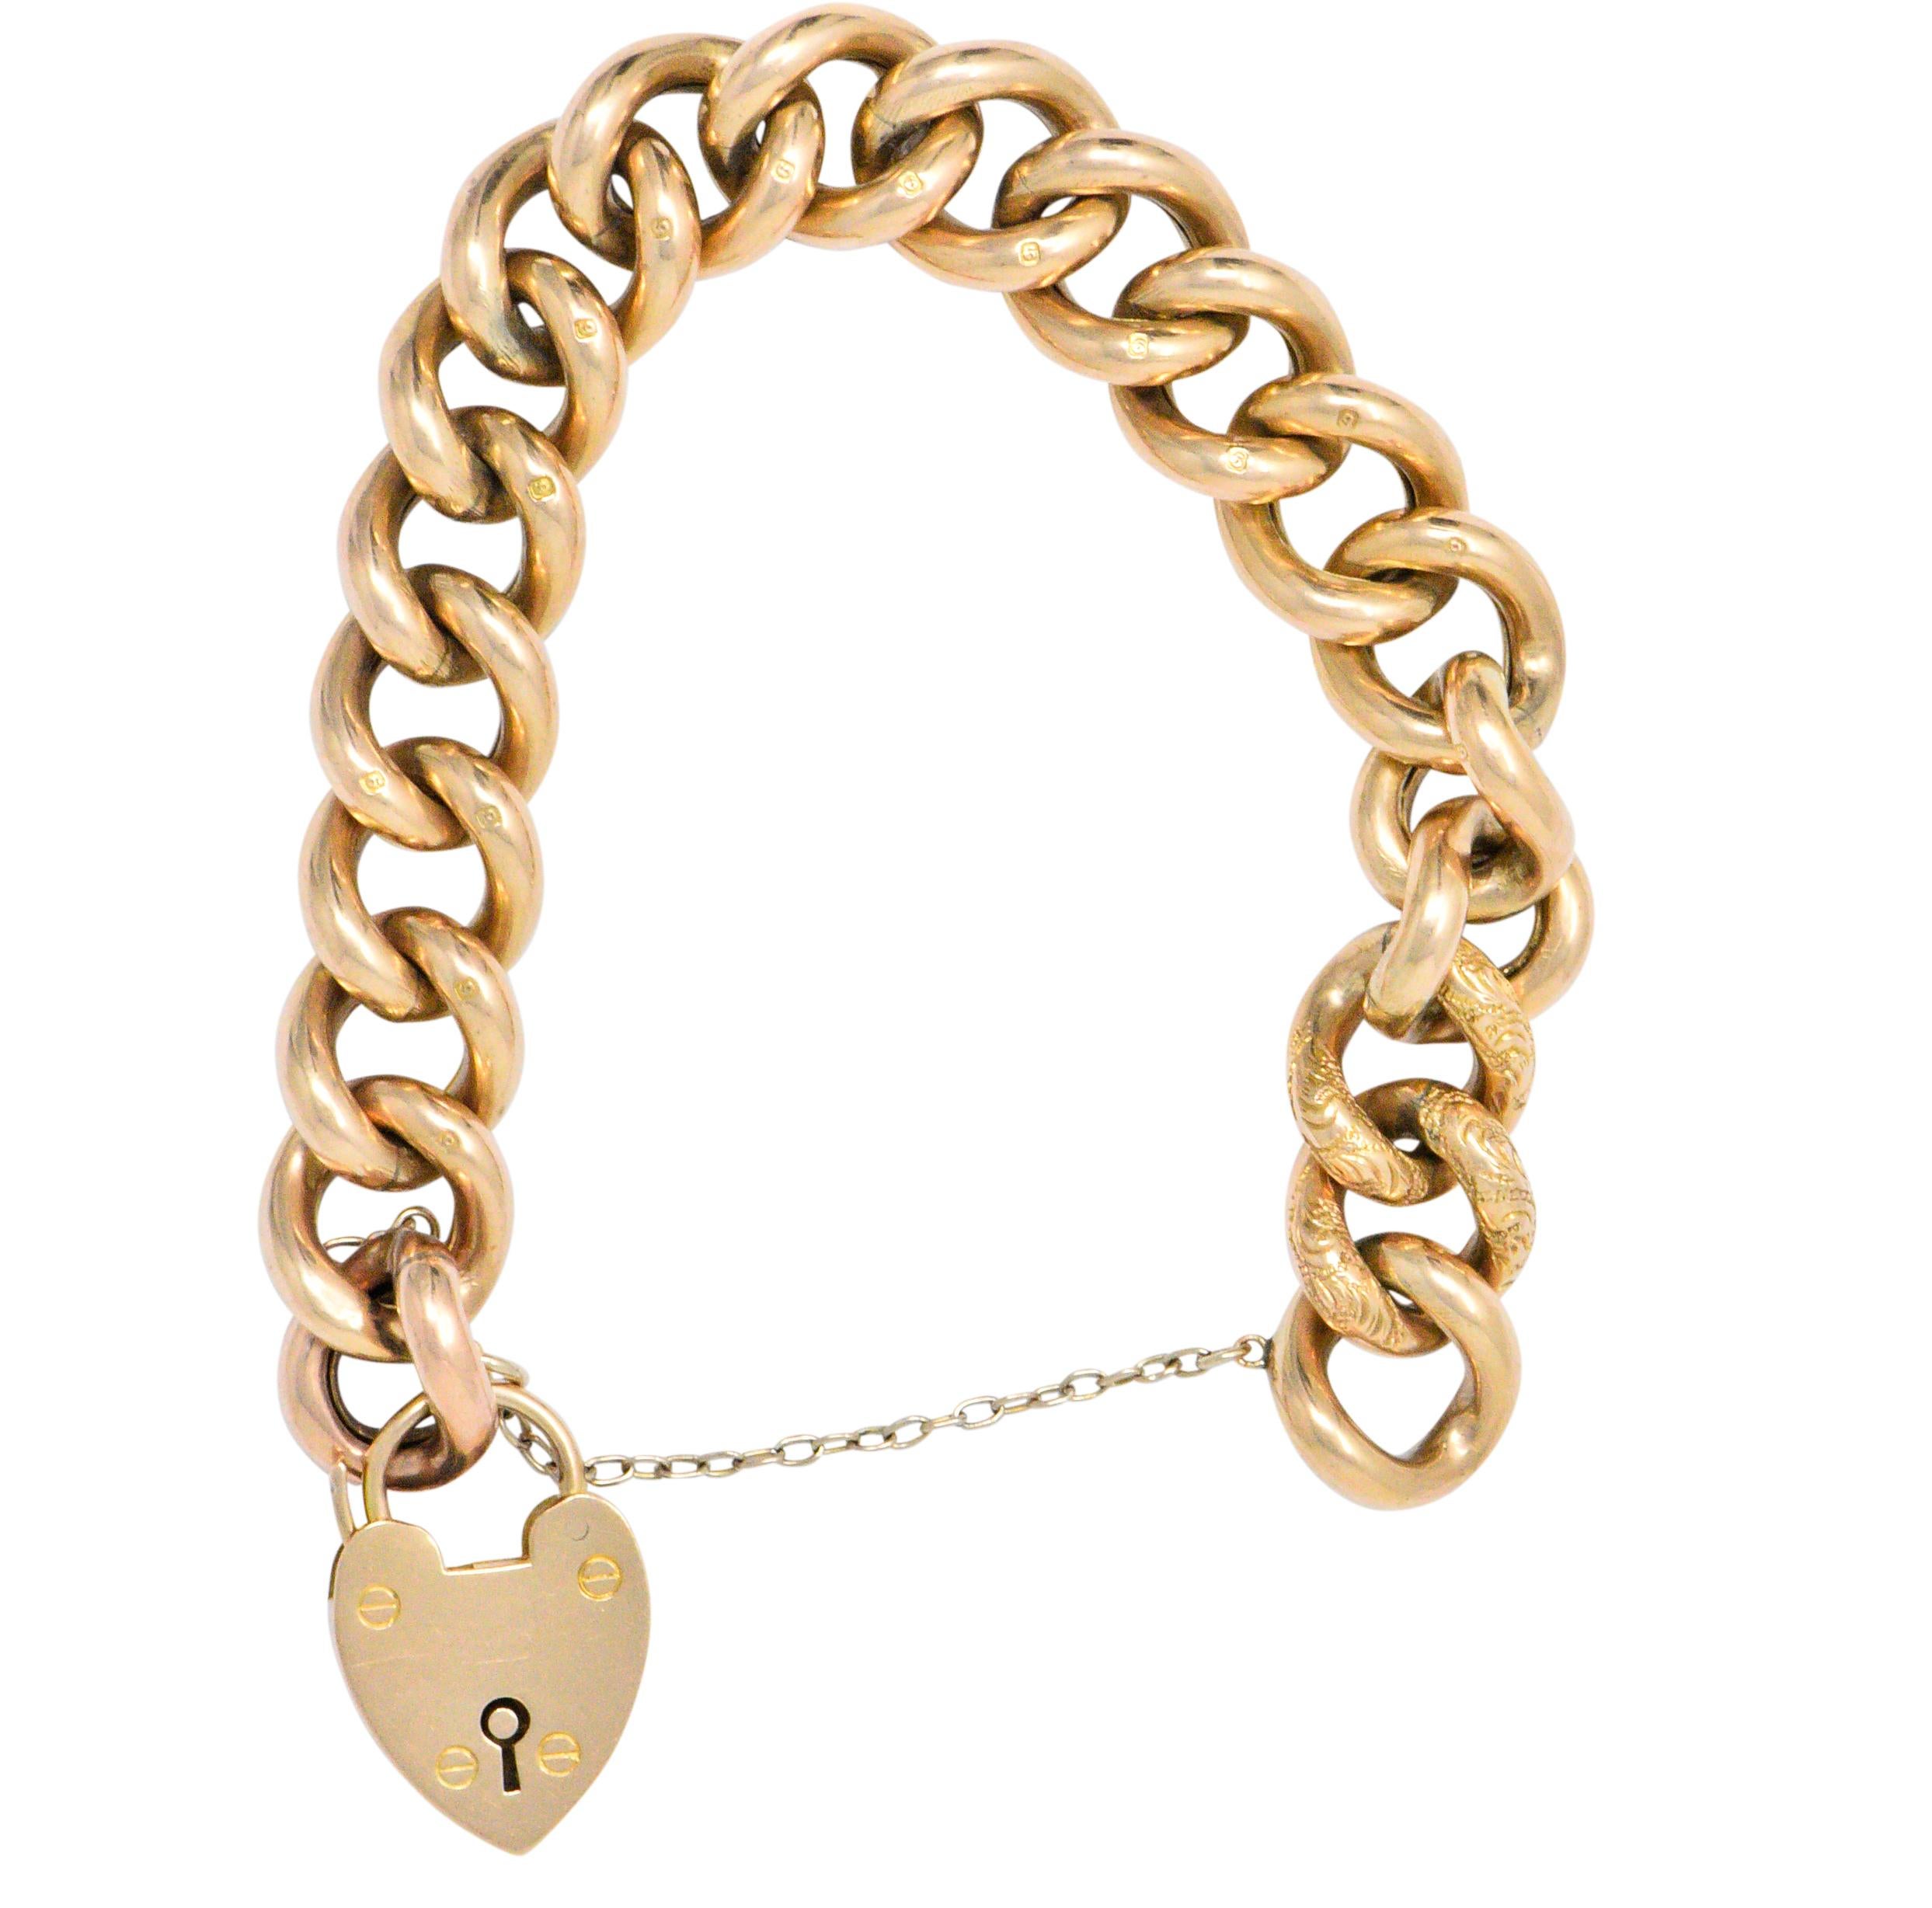 Charm bracelet comprised of puffed curb links

With accent links hand engraved with stylized rose and foliate motif

Featuring a dangling heart shaped padlock with prominent screw head motif and keyhole recess

Padlock acts as clasp complete with